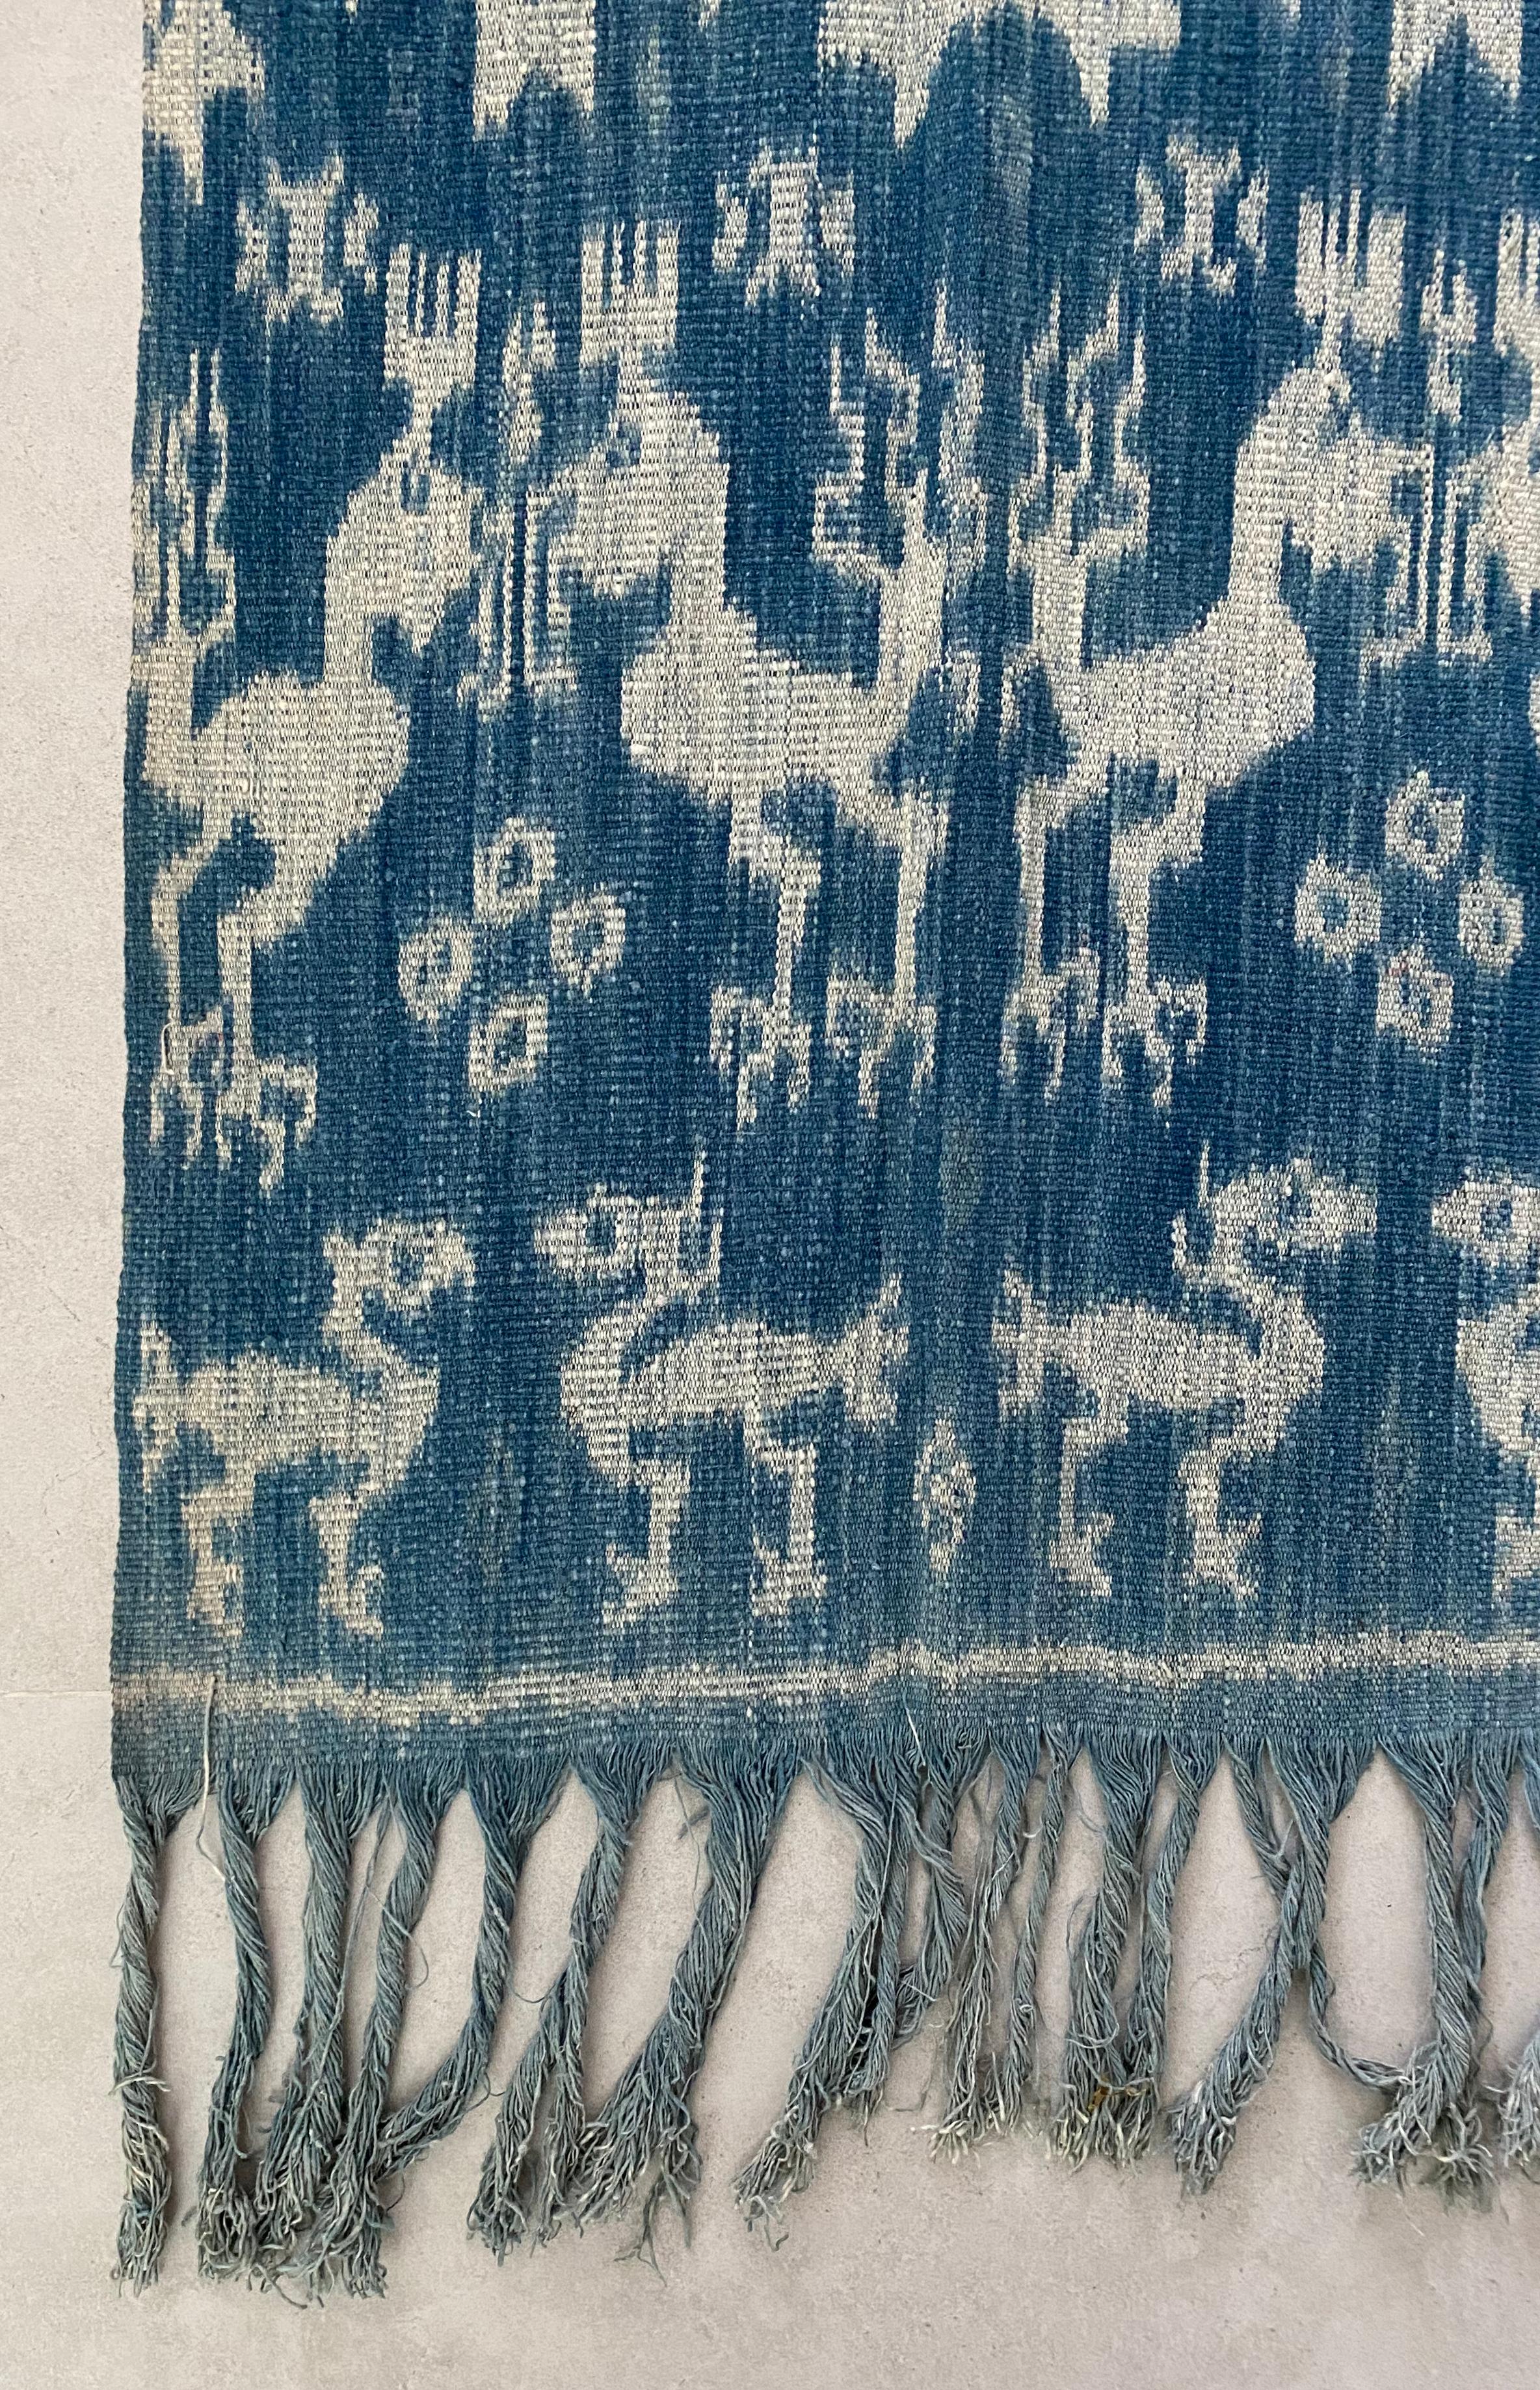 Hand-Woven Ikat Textile from Sumba Island, Indonesia For Sale